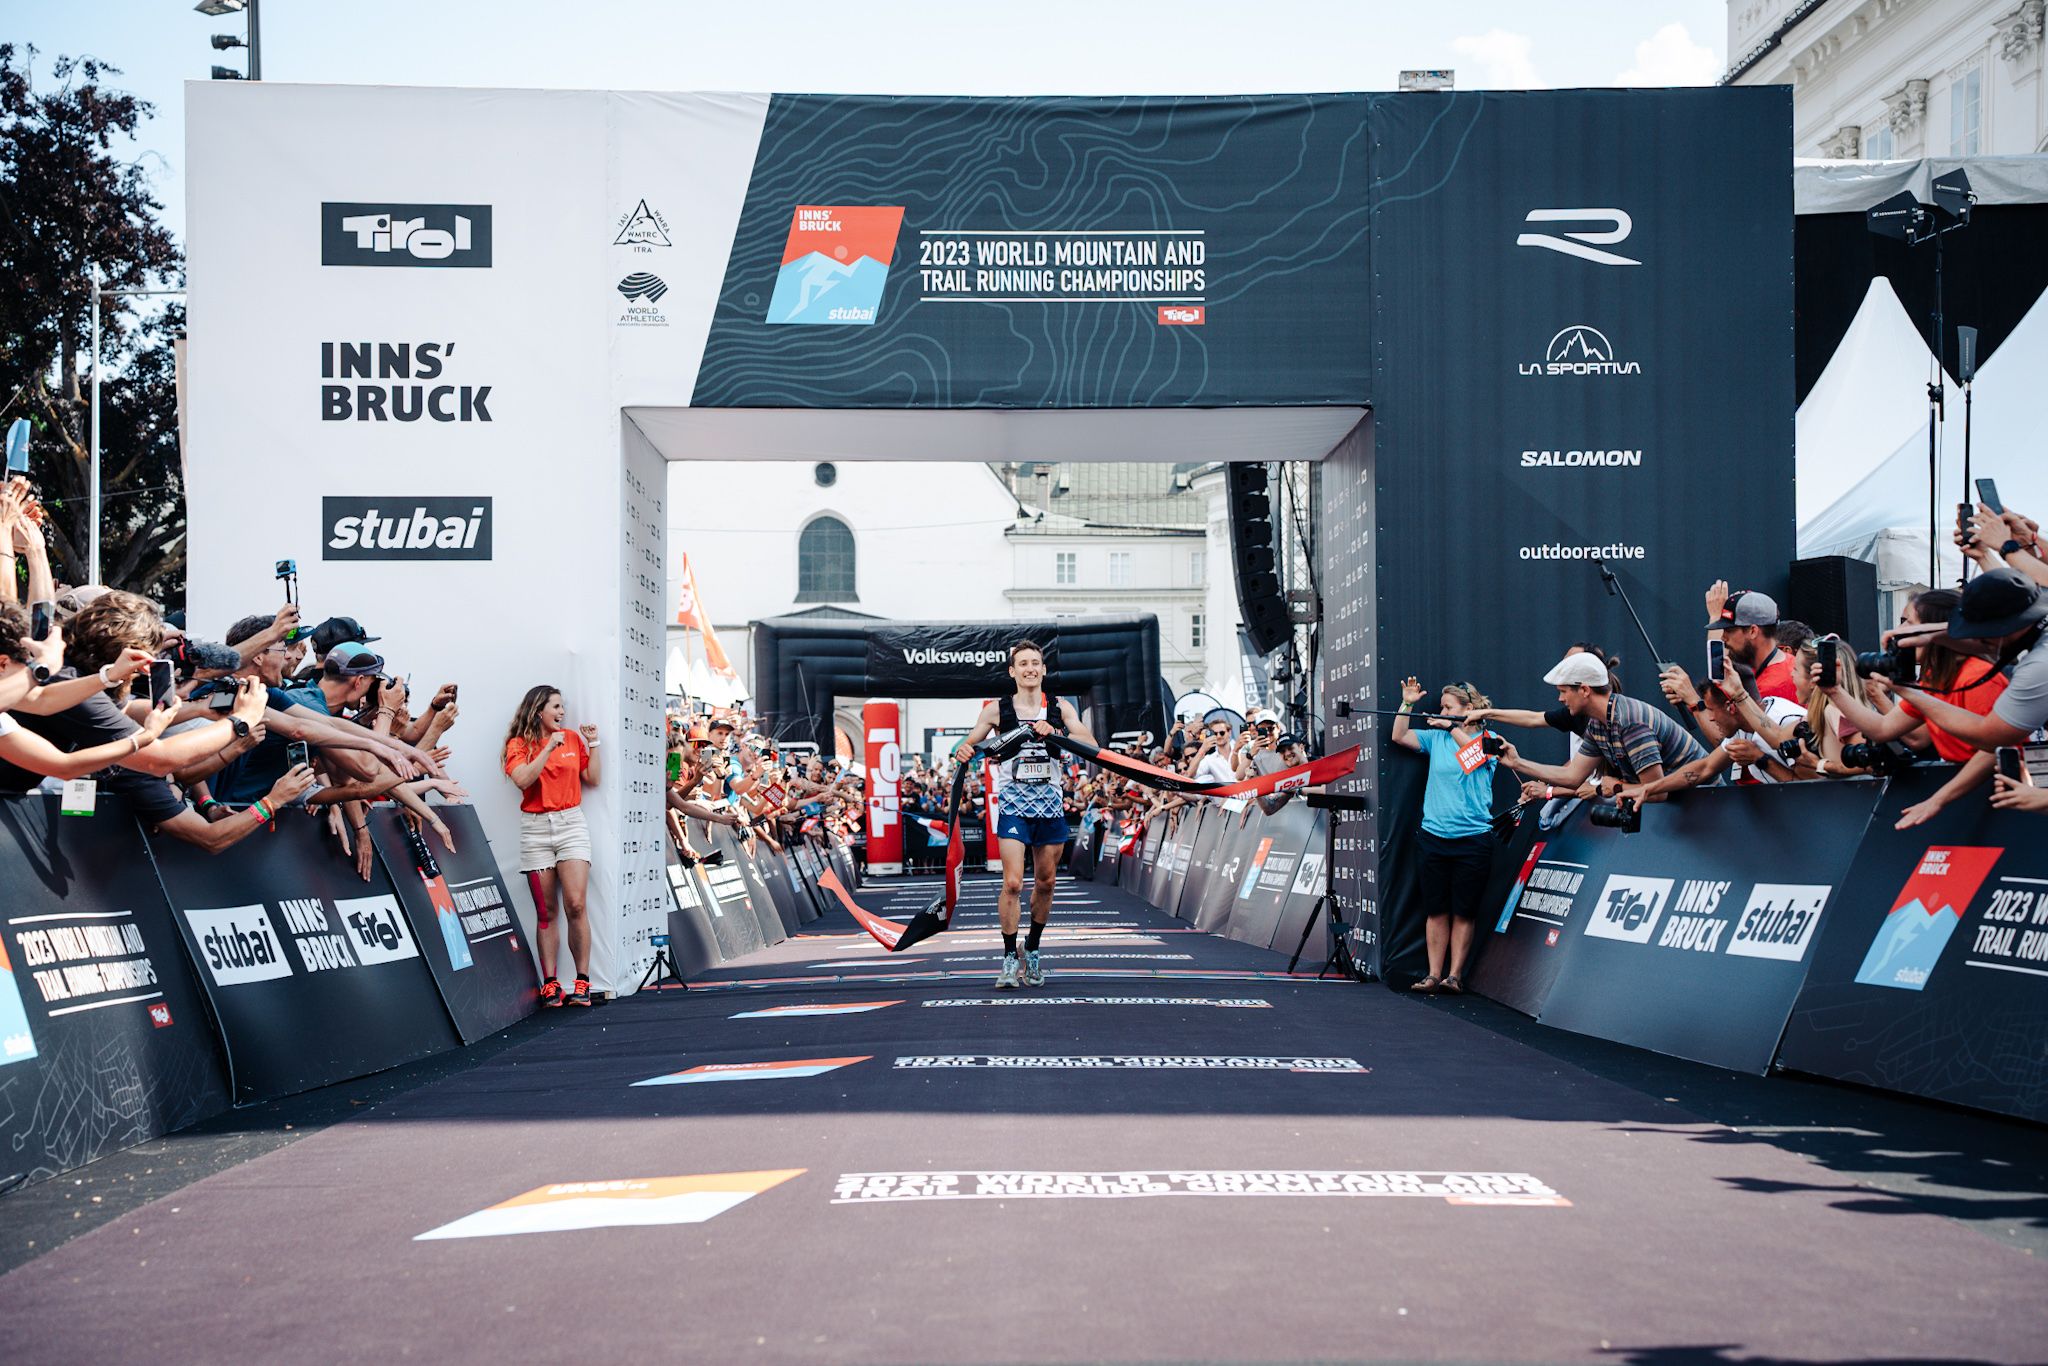 Benjamin Roubiol wins the 85km race at the World Mountain and Trail Running Championships